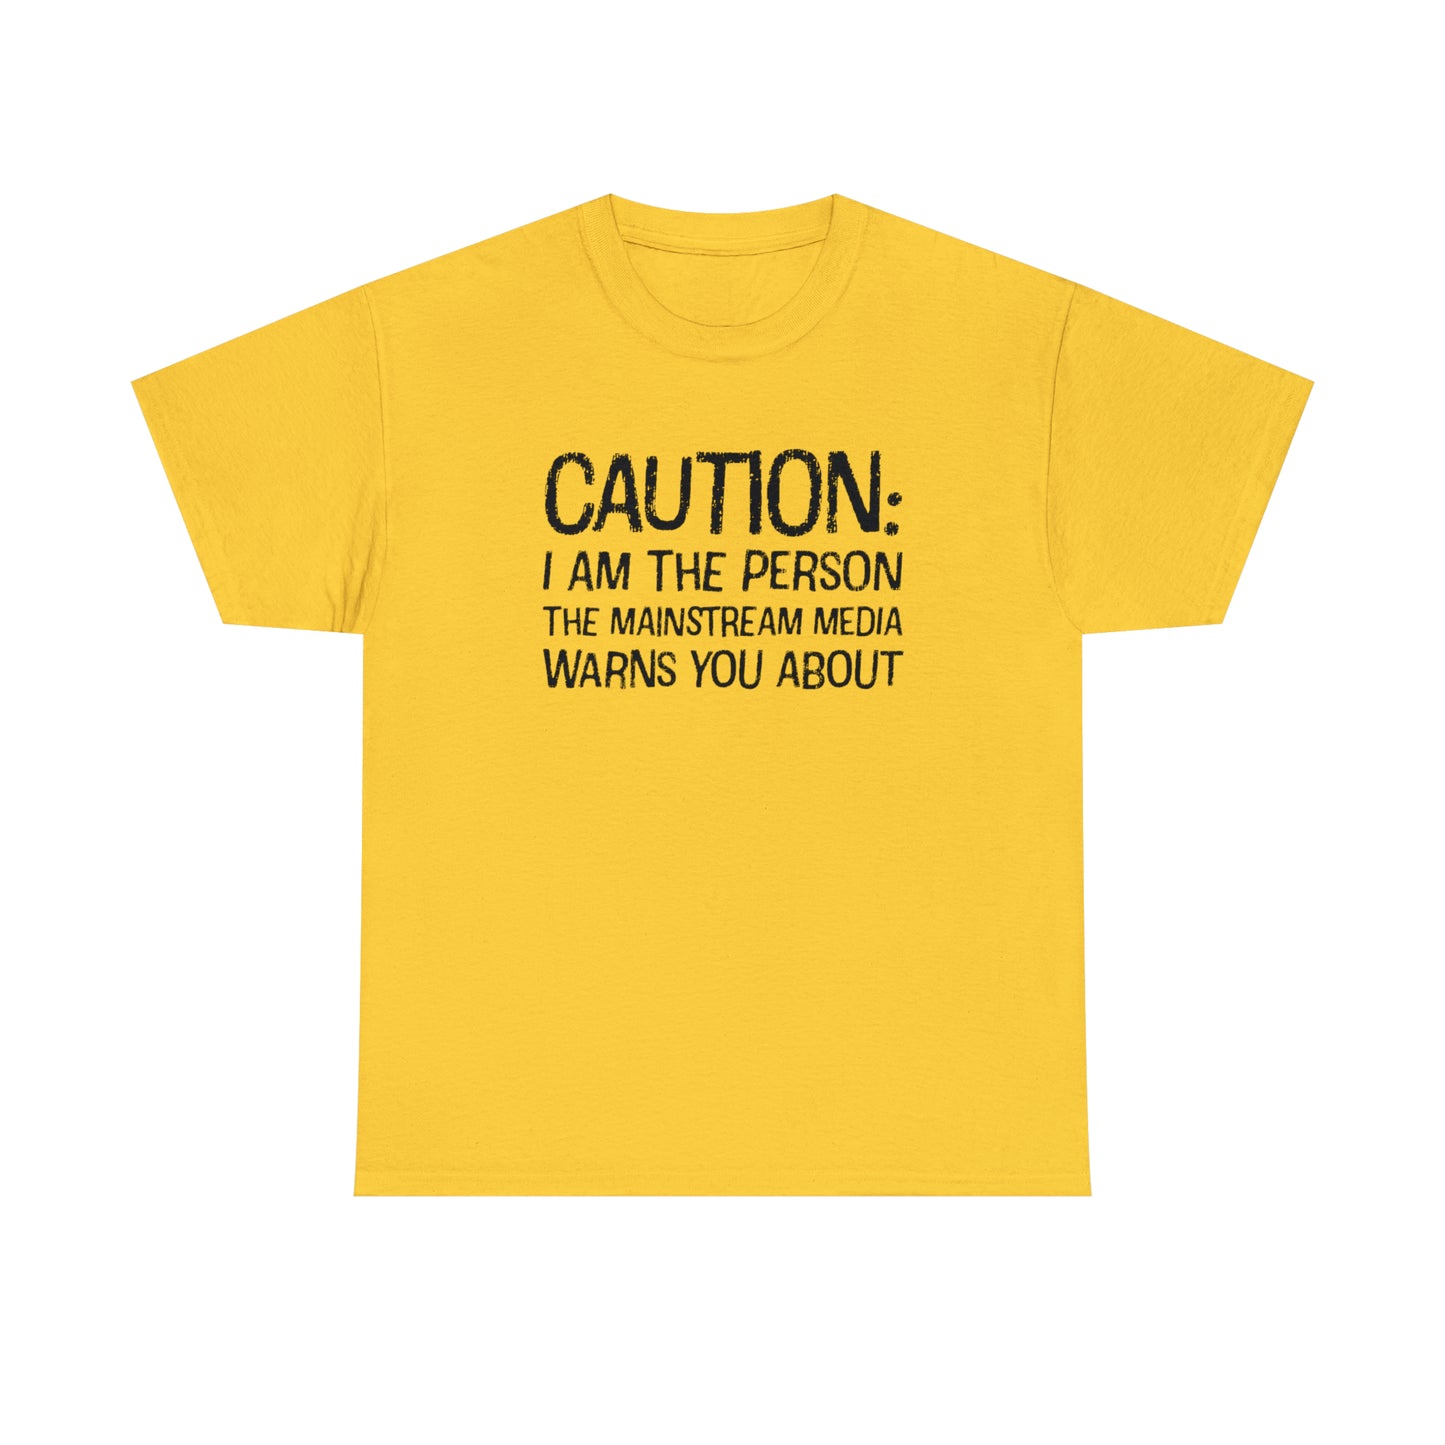 Caution T-Shirt For Warning TShirt For MSM T Shirt For Conservative Tee For Fake News Shirt For MAGA Gift